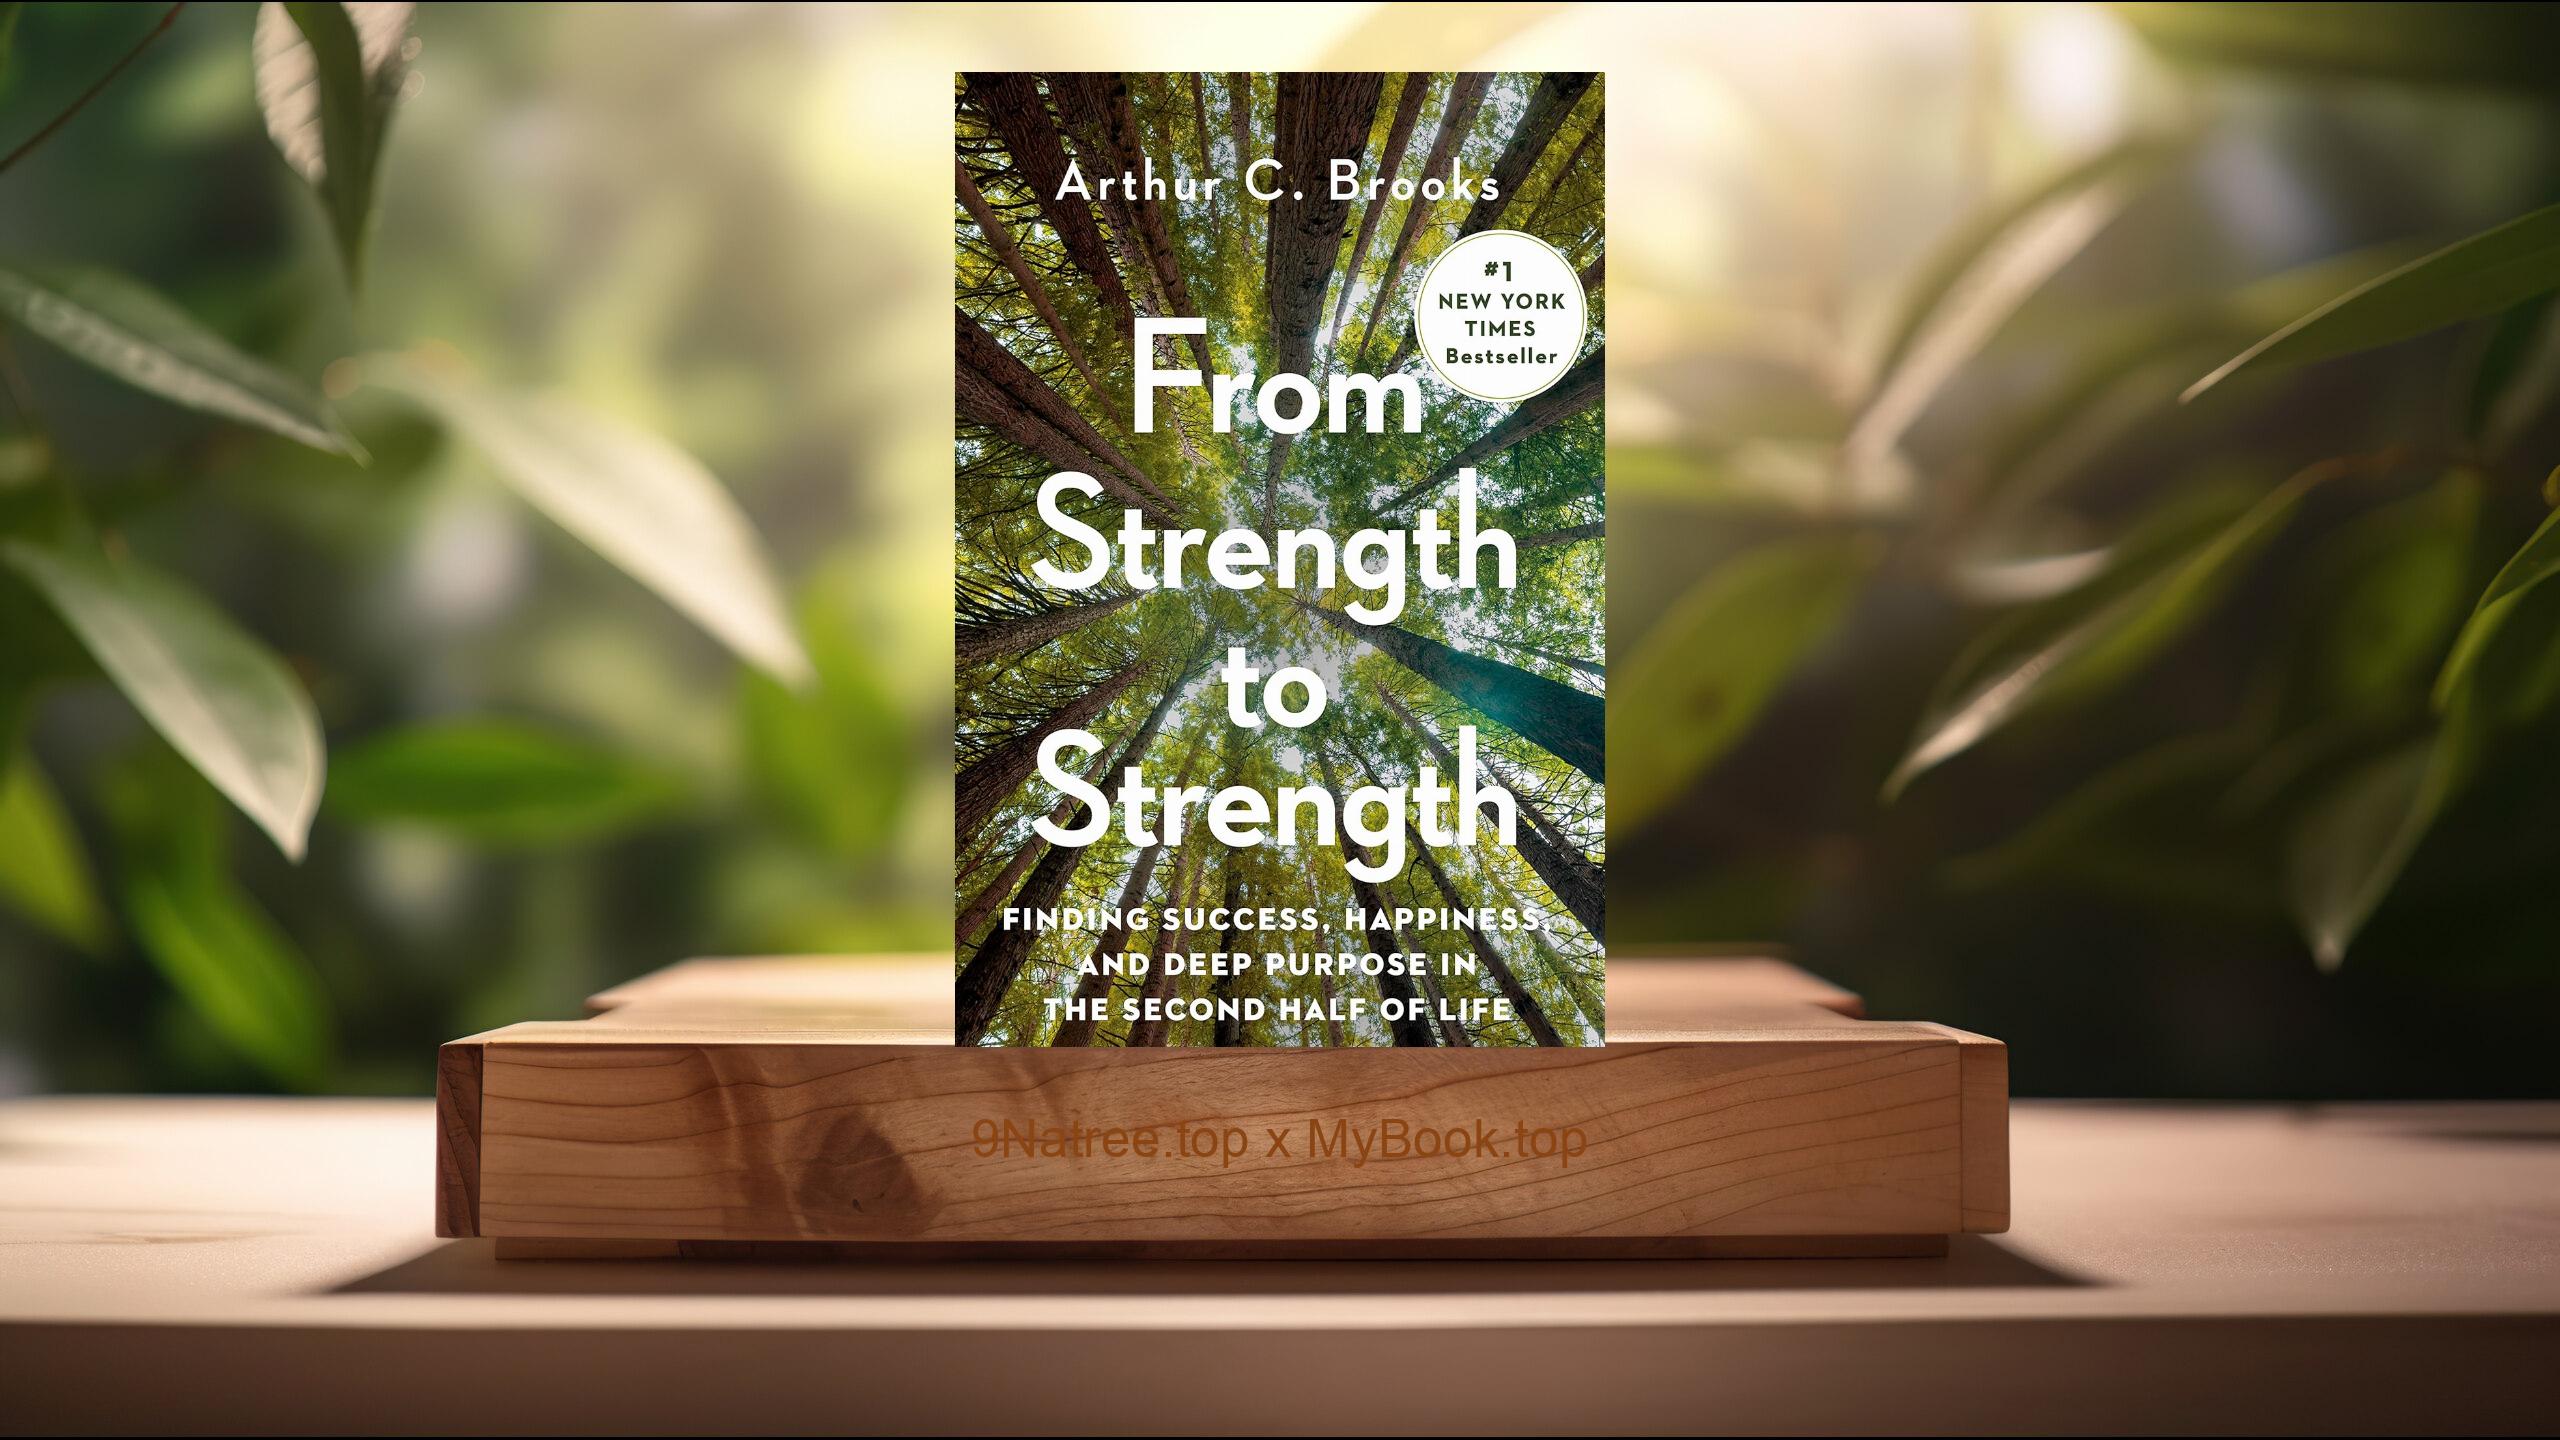 [Review] From Strength to Strength: Finding Success, Happiness, and Deep Purpose in the Second Half of Life (Arthur C. Brooks) Summarized